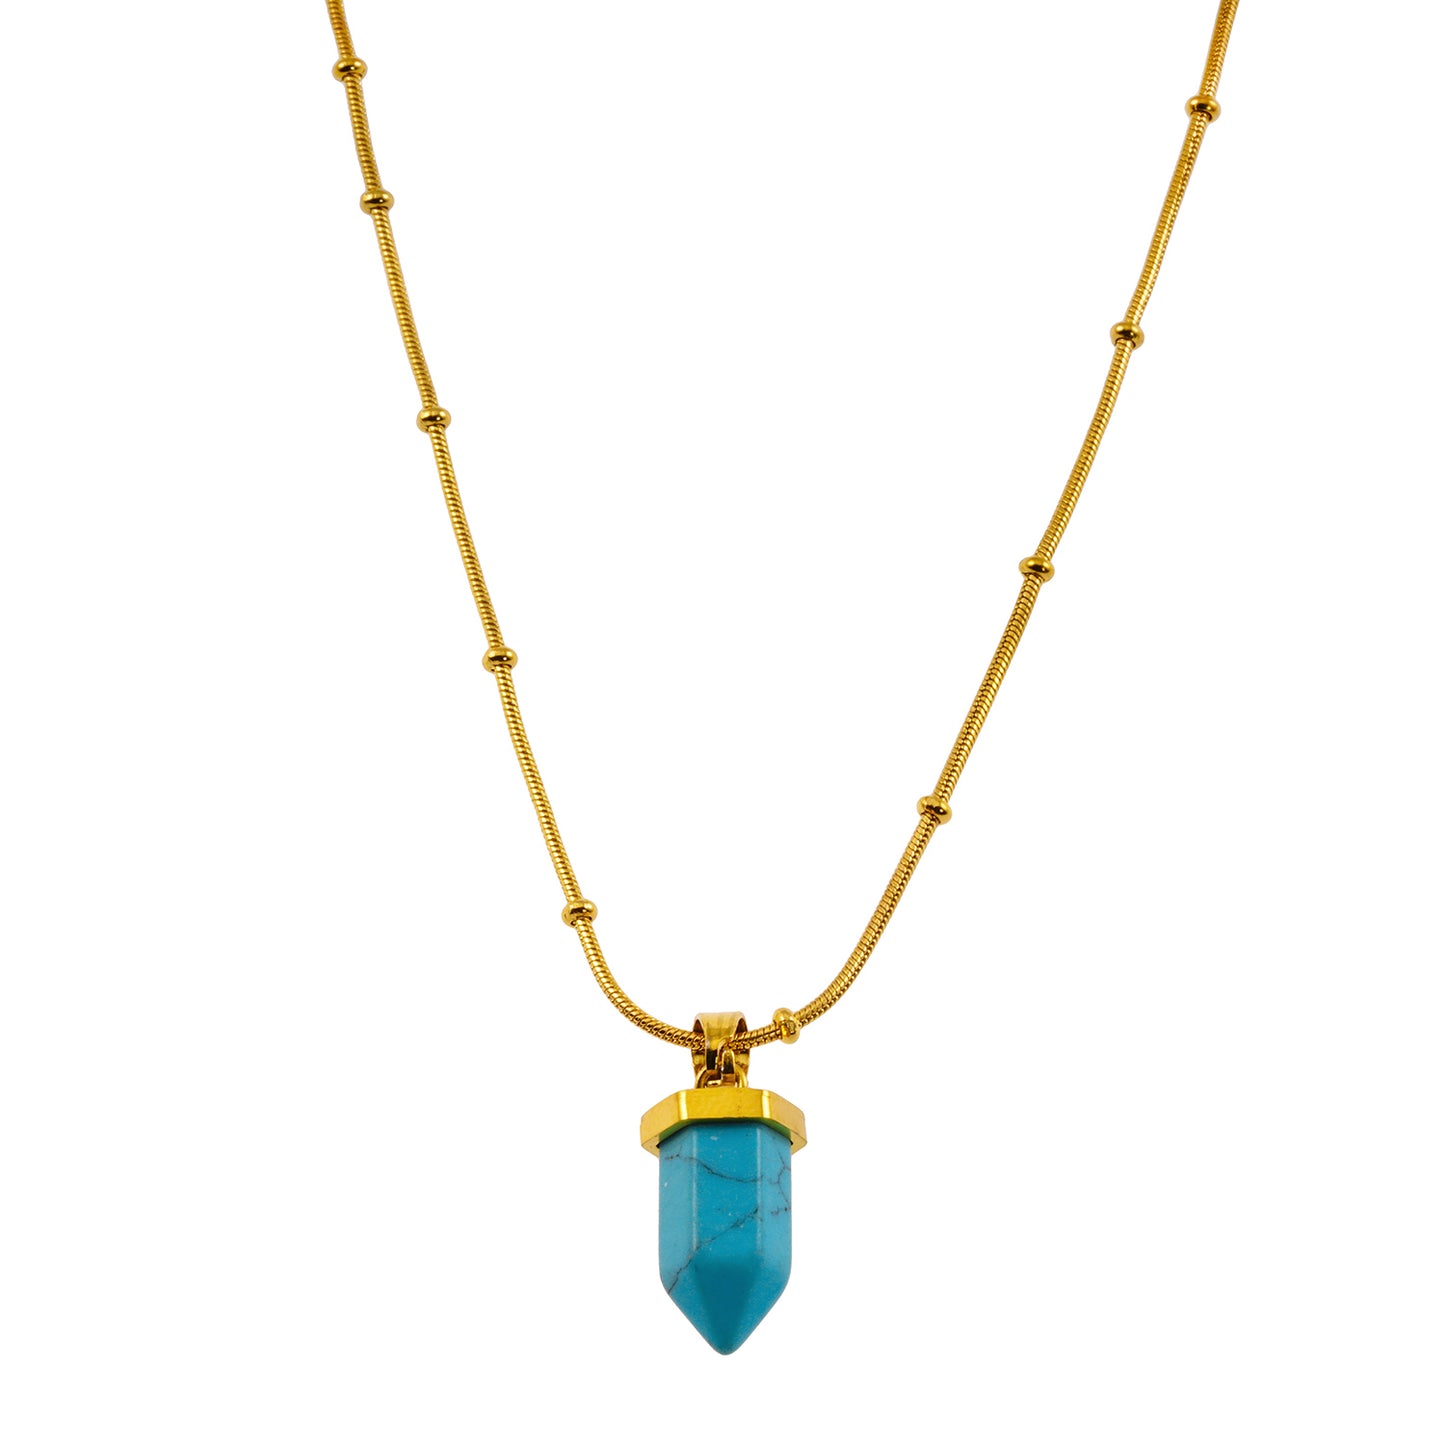 PIPPA: African Turquoise Stone Pendant Anchored on a Beaded Snake Skin Textured Chain Necklace.